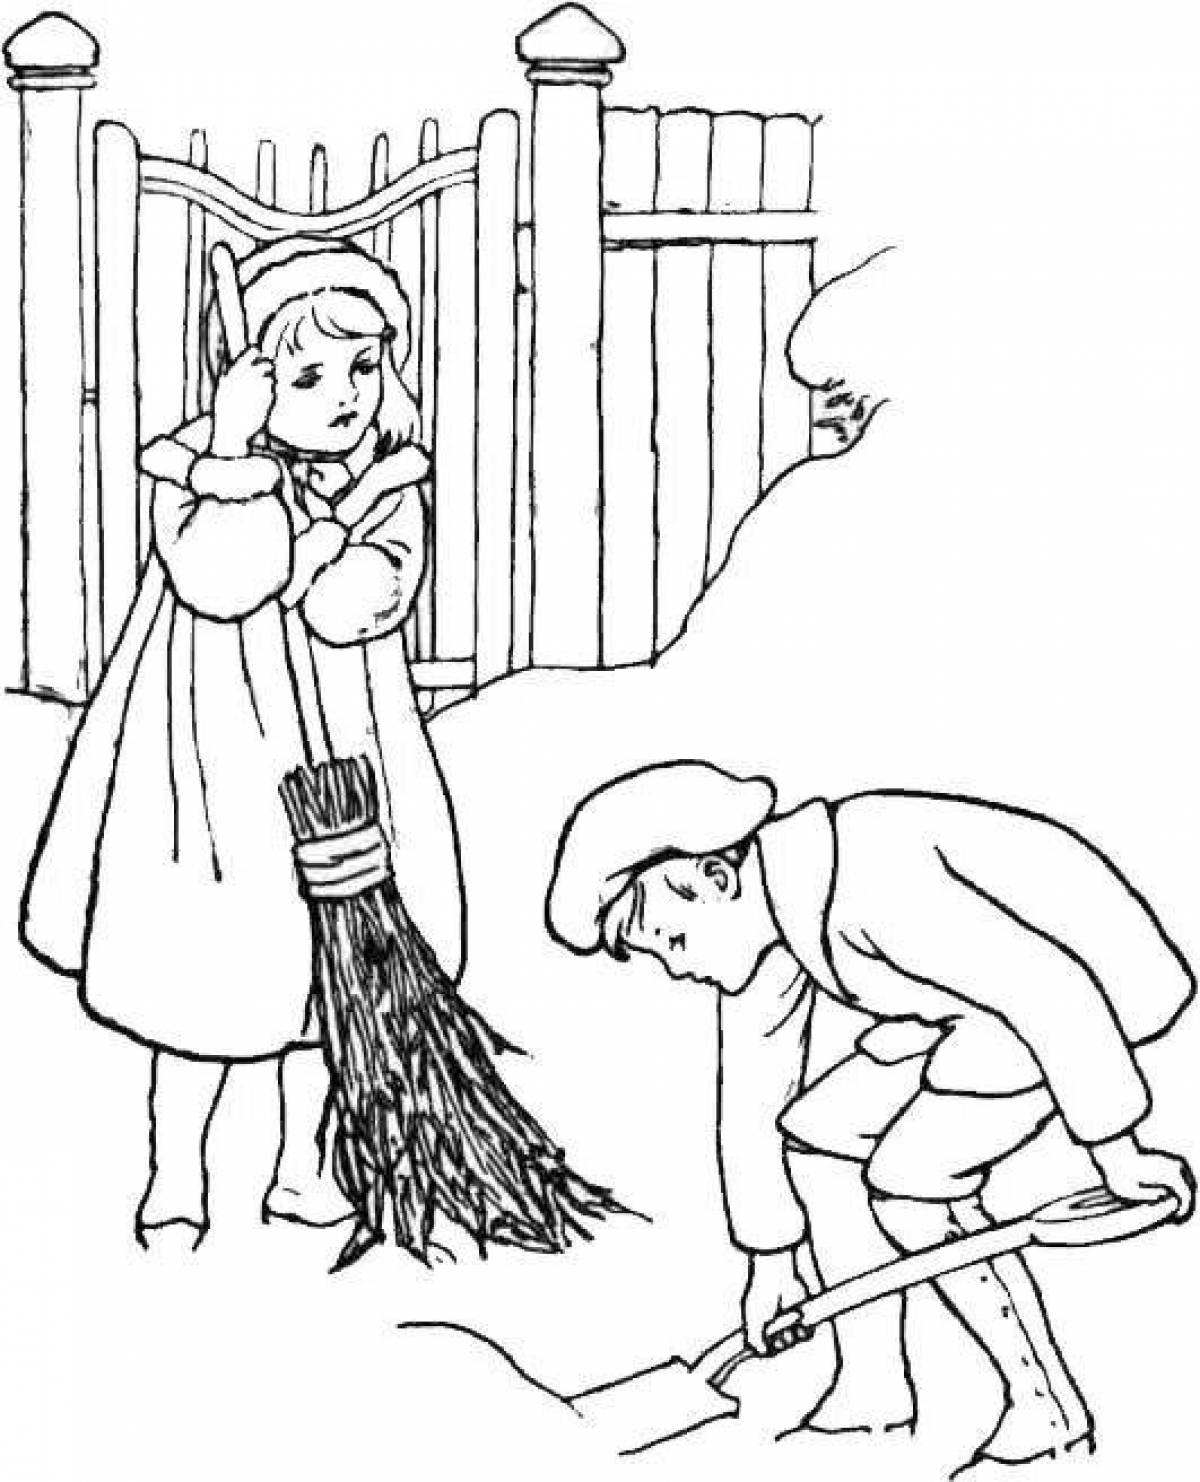 Majestical coloring page of farm works in winter